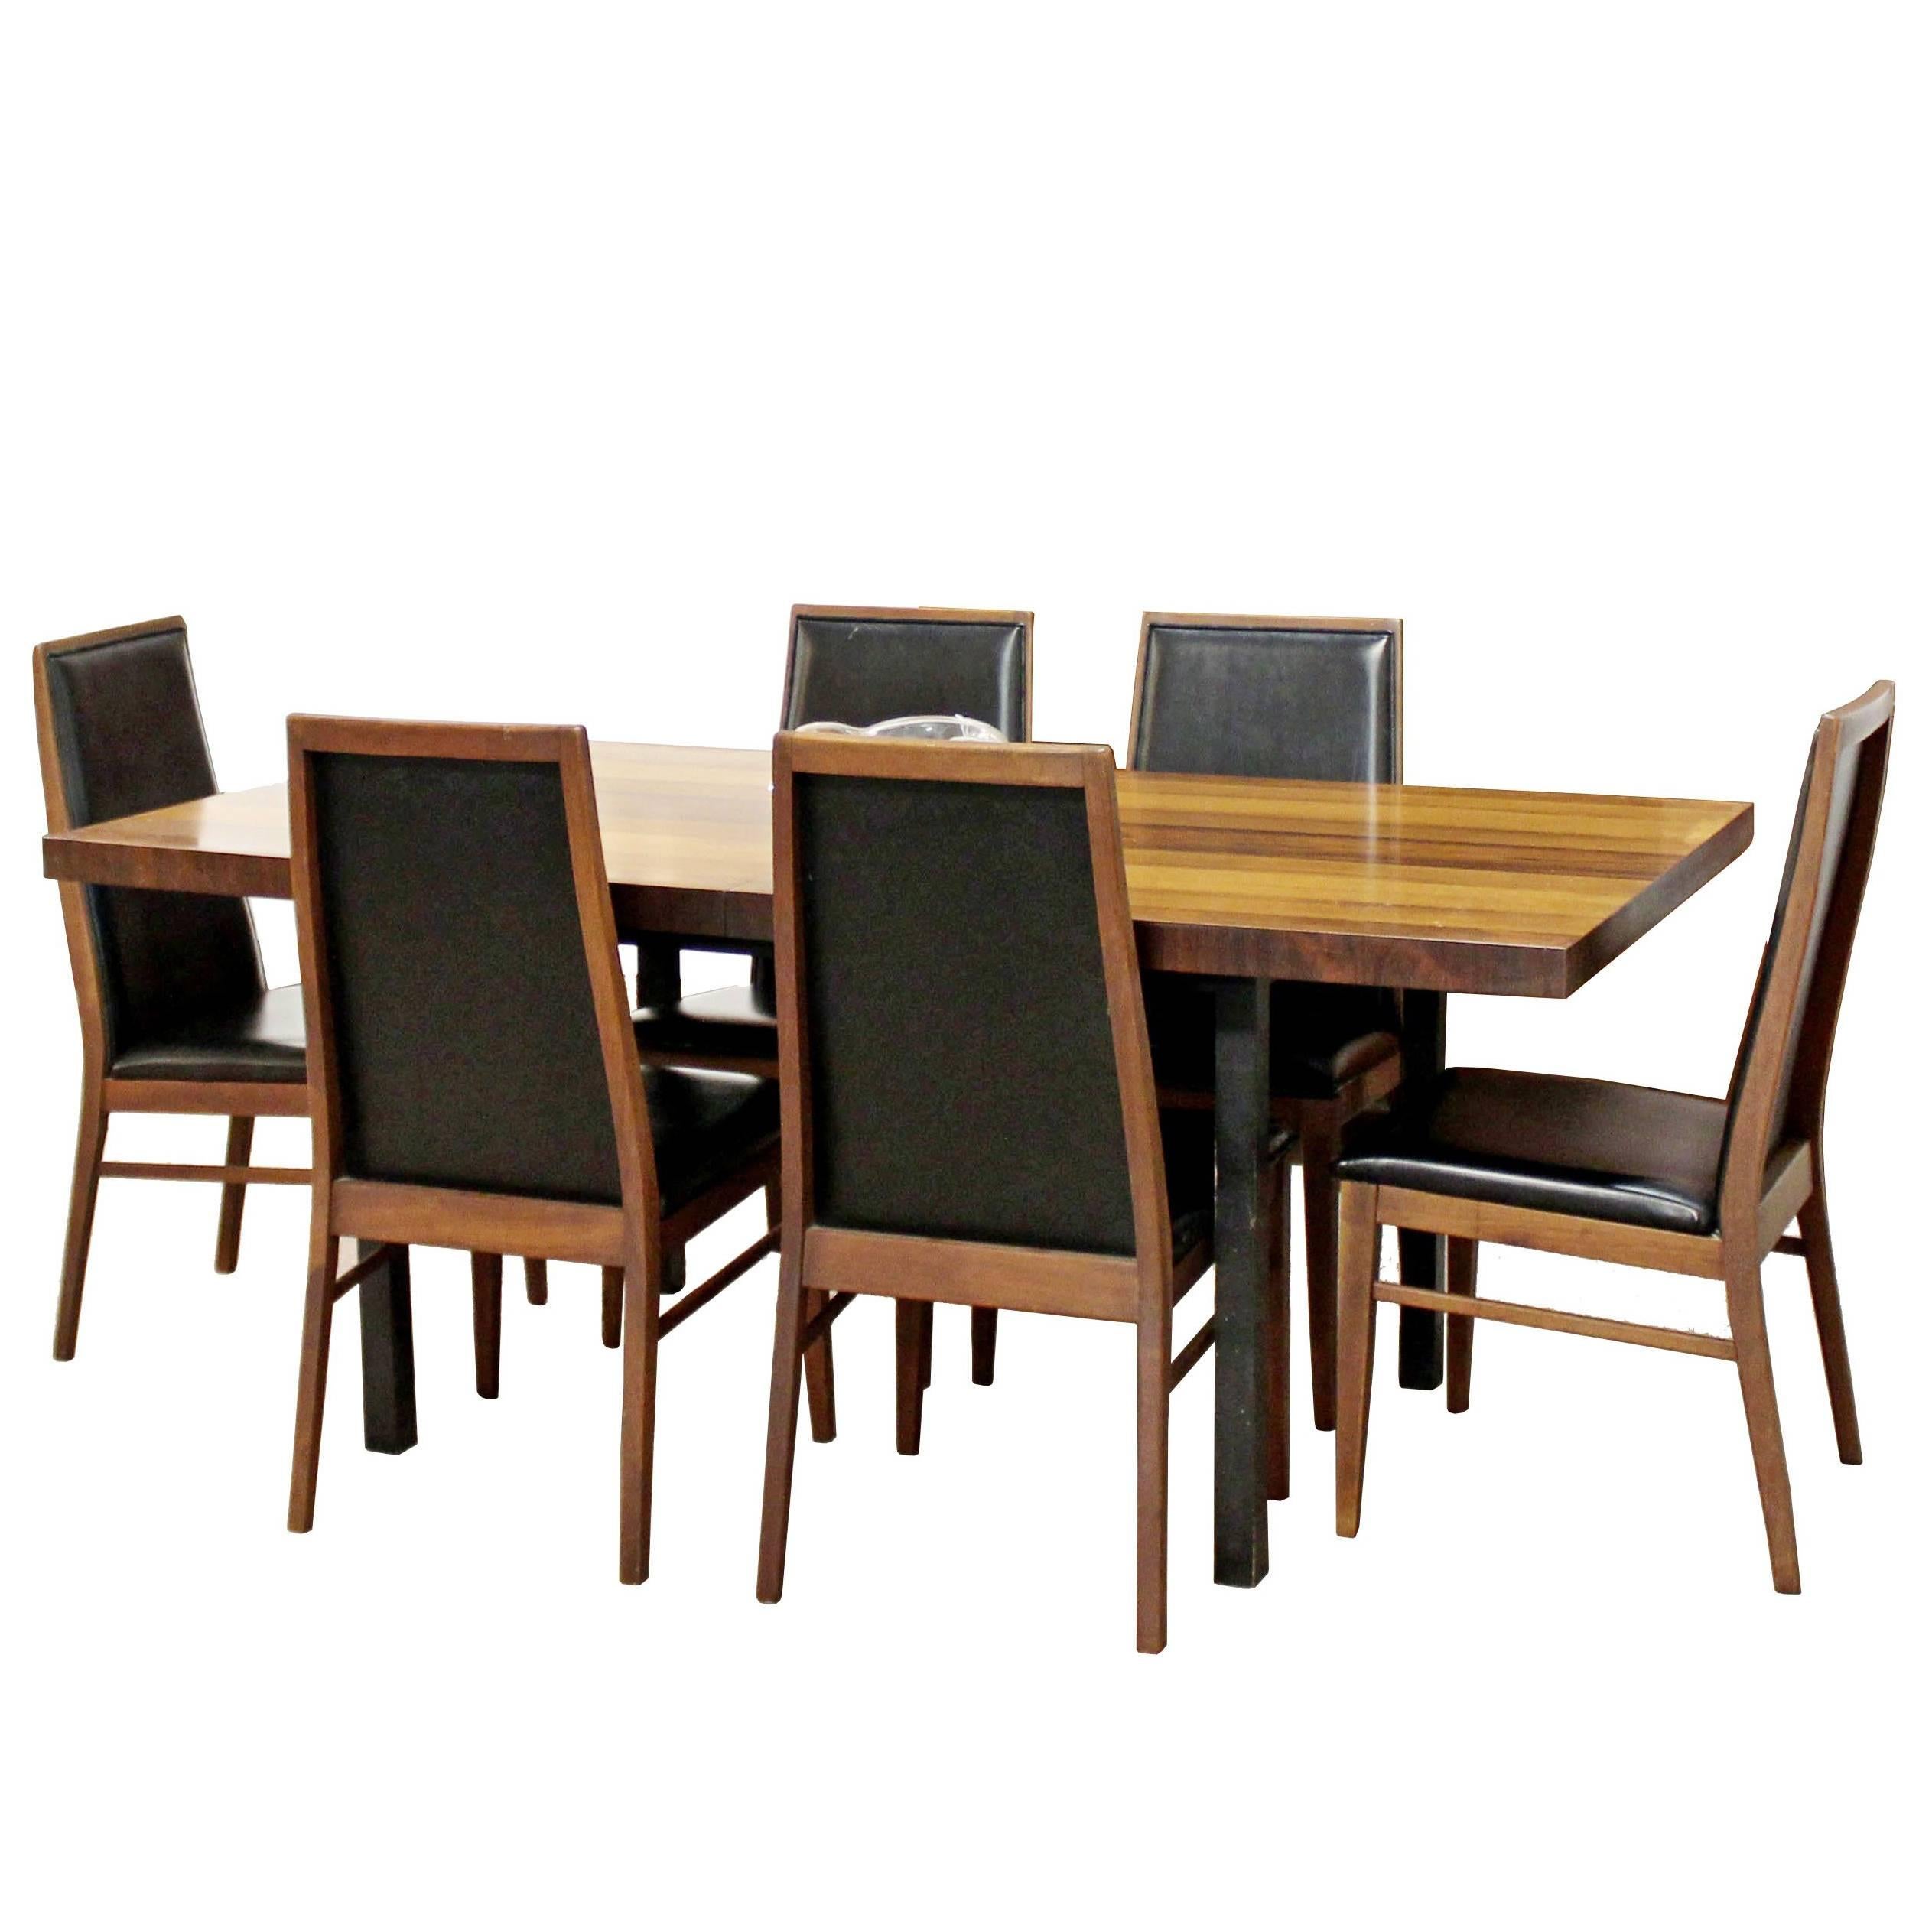 Mid-Century Modern Milo Baughman Directional Dining Table Dillinghman Six Chairs